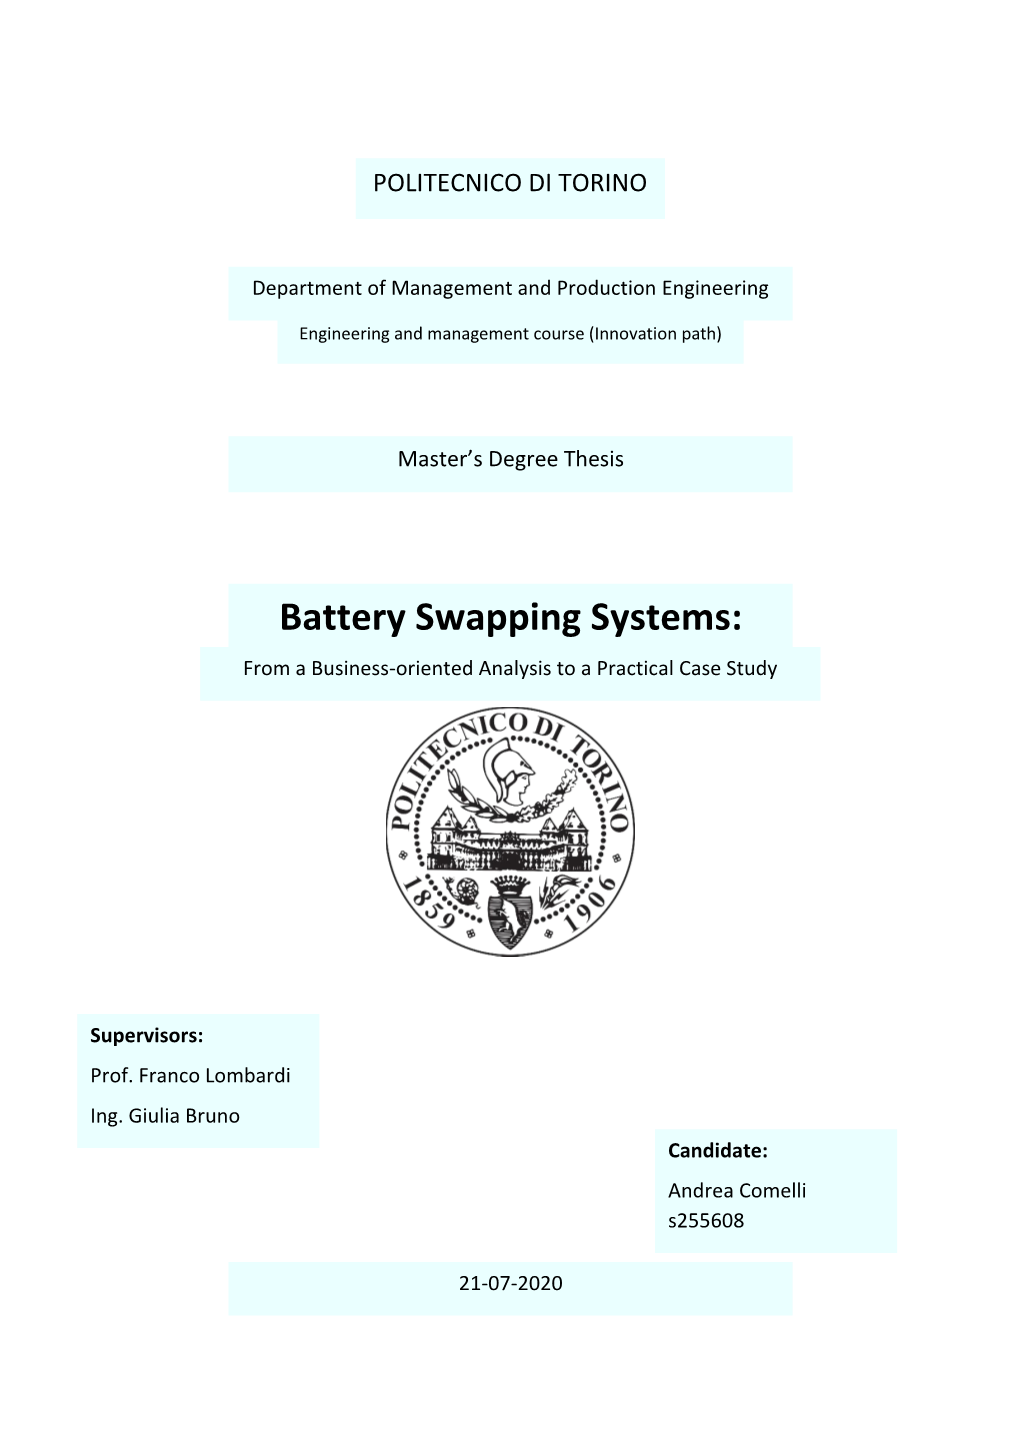 Battery Swapping Systems: from a Business-Oriented Analysis to a Practical Case Study